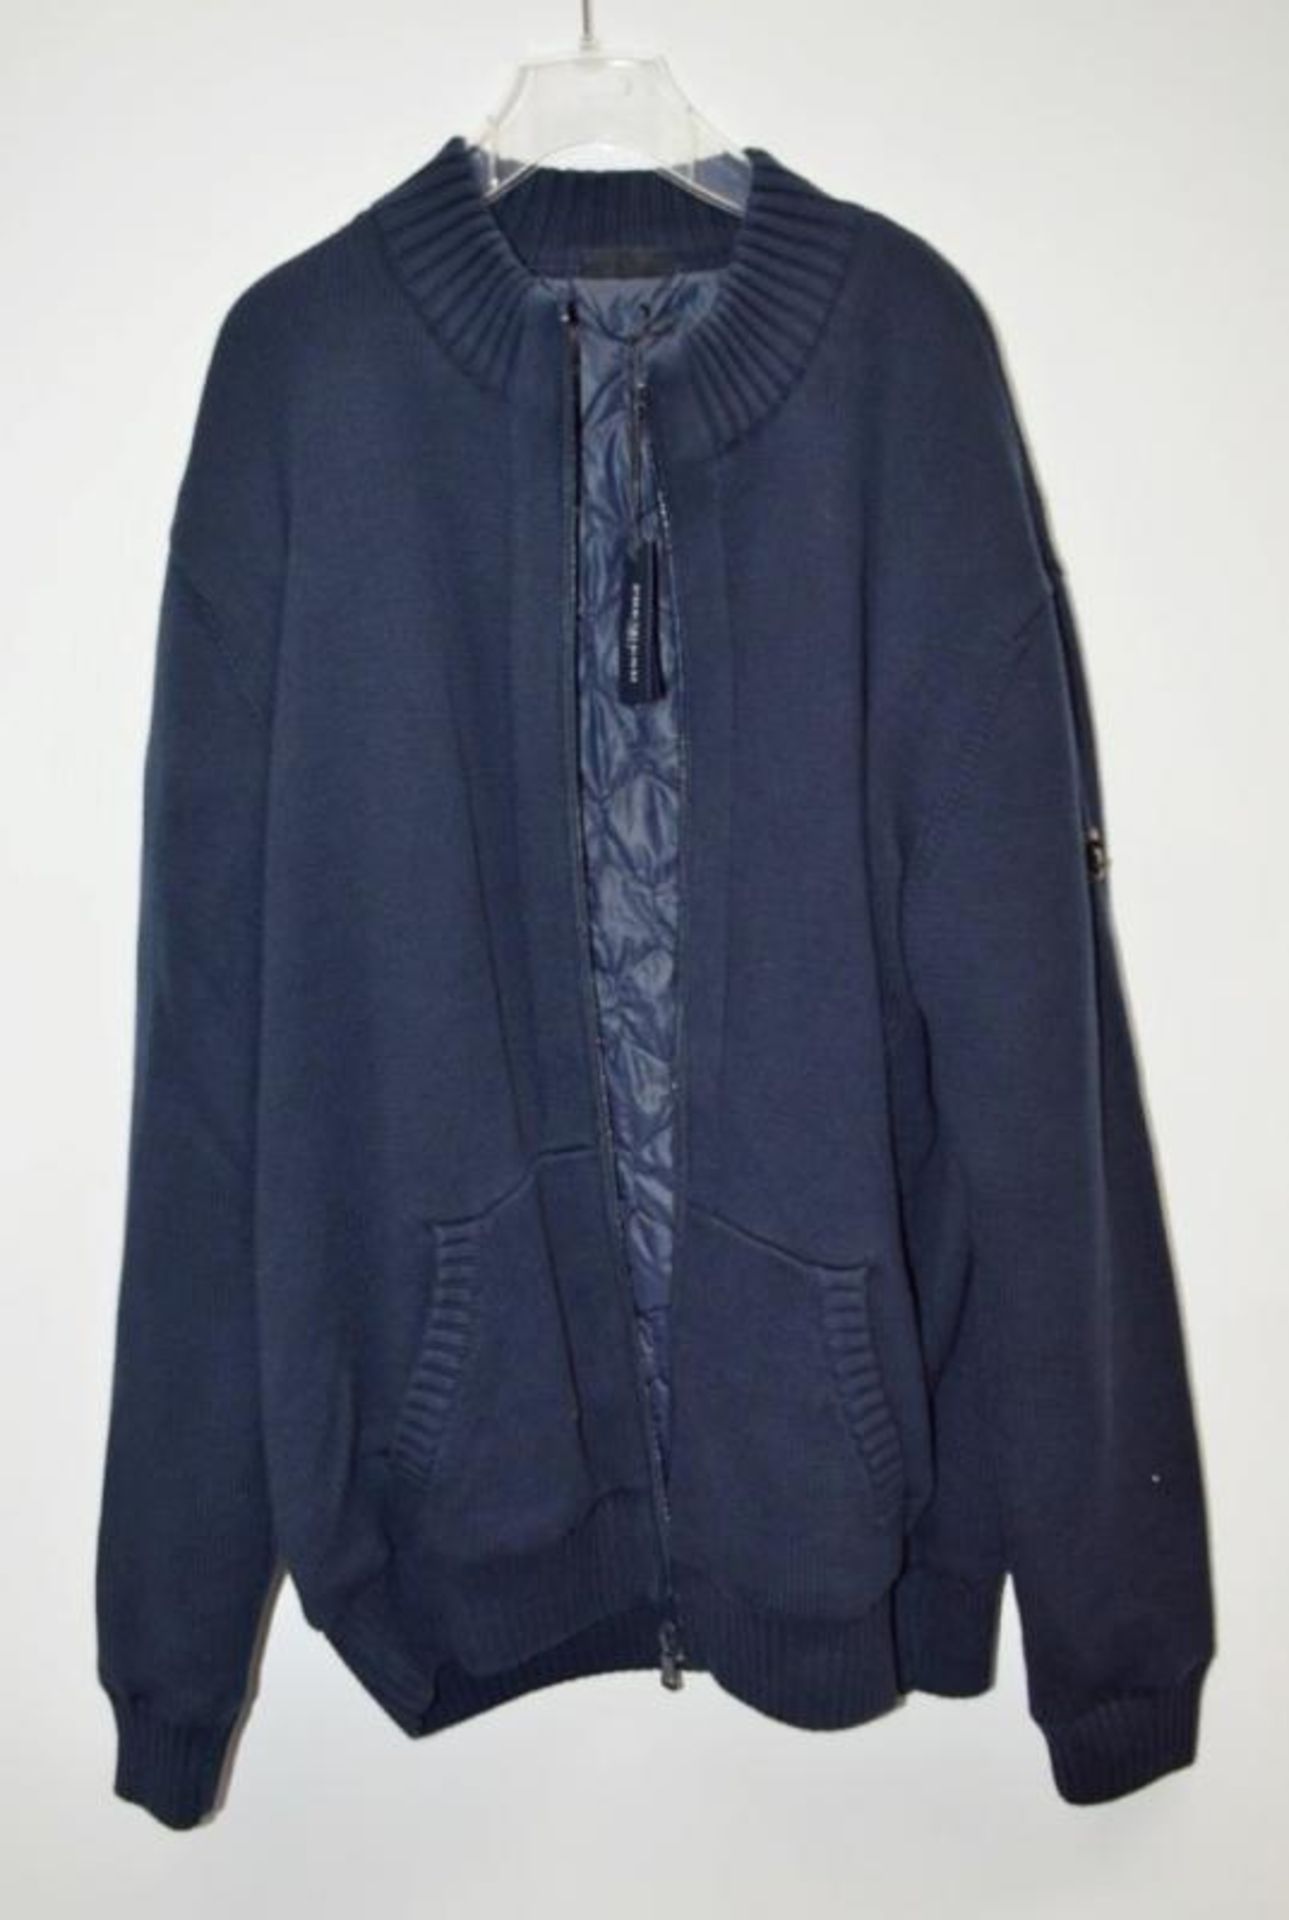 5 x Assorted PRE END / GNIOUS Long Sleeve Cardigans & Tops - New Stock With Tags - Recent Retail - Image 6 of 9